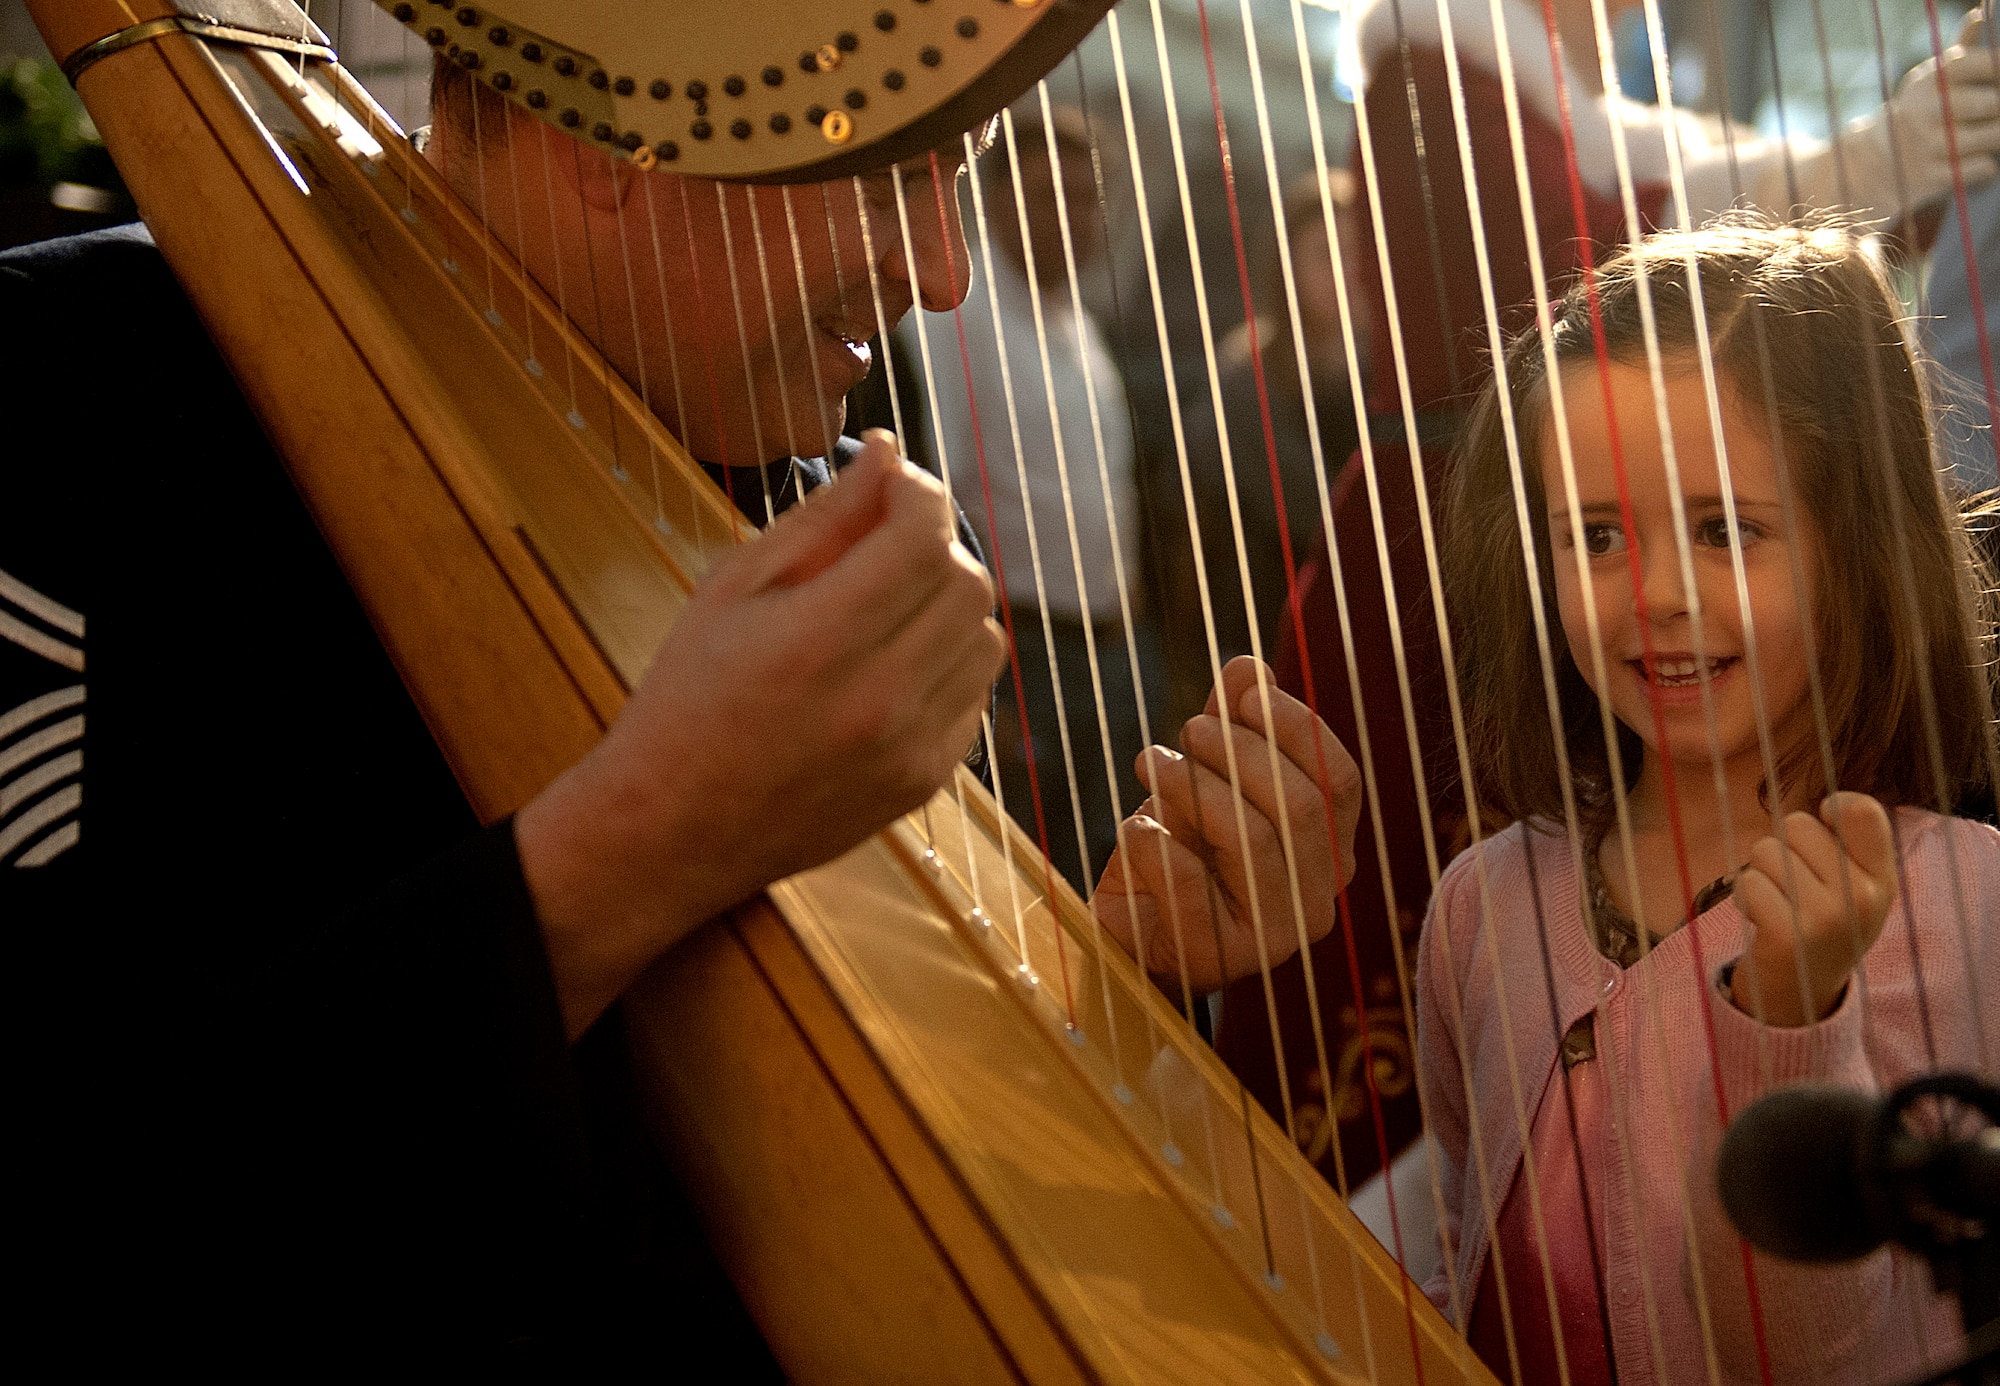 Senior Master Sgt. Eric Sabatino (left) explains how to play the harp to 5-year-old Sofia Hess after a holiday concert Dec. 15, 2013, at the Smithsonian National Air and Space Museum, Udvar-Hazy Center, Chantilly, Va.  Sabatino is an U.S. Air Force Band harpist. (U.S. Air Force photo/Staff Sgt. Carlin Leslie)